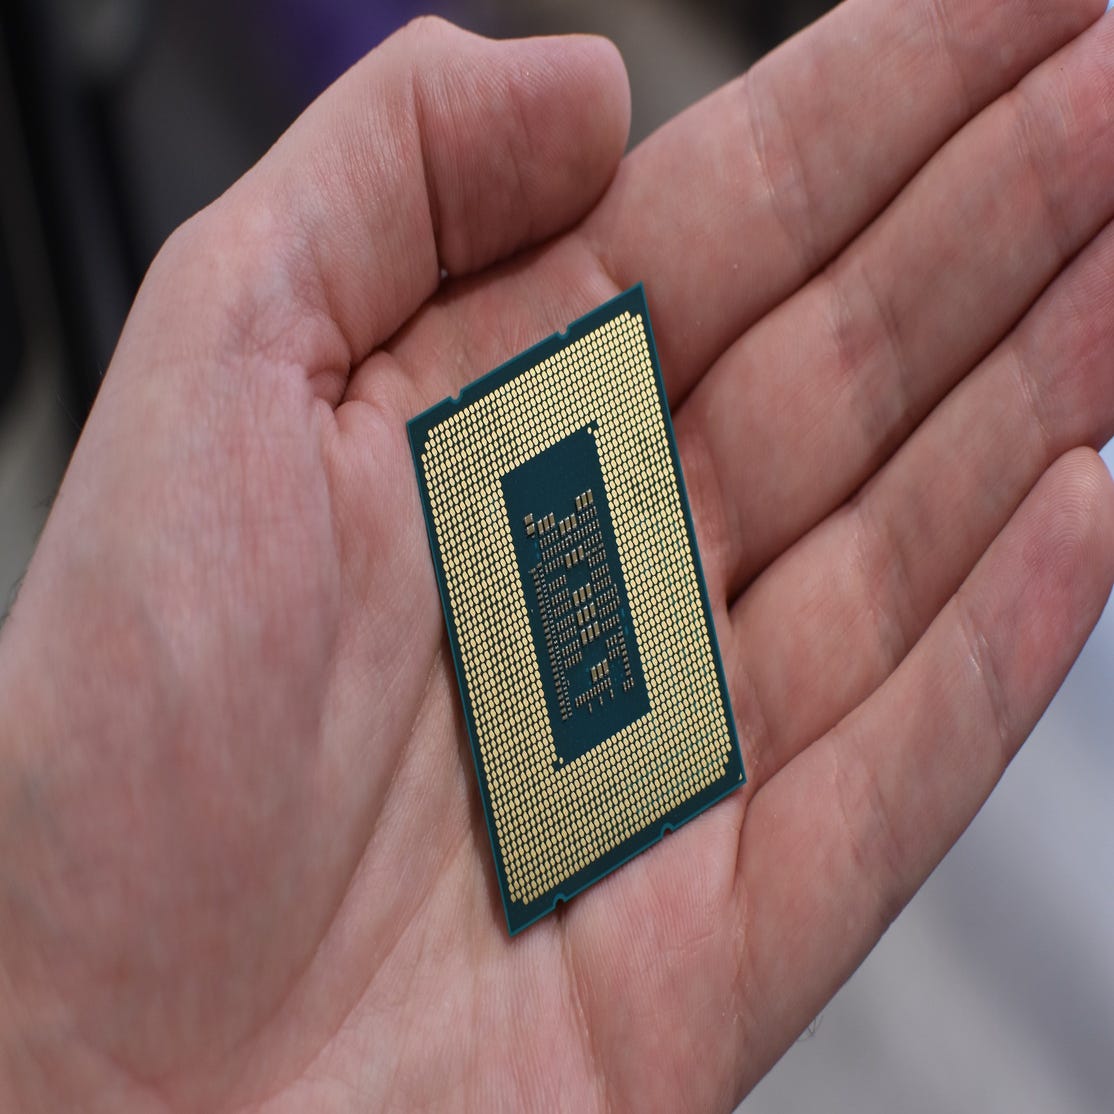 How to install a CPU: Putting the brain into your computer